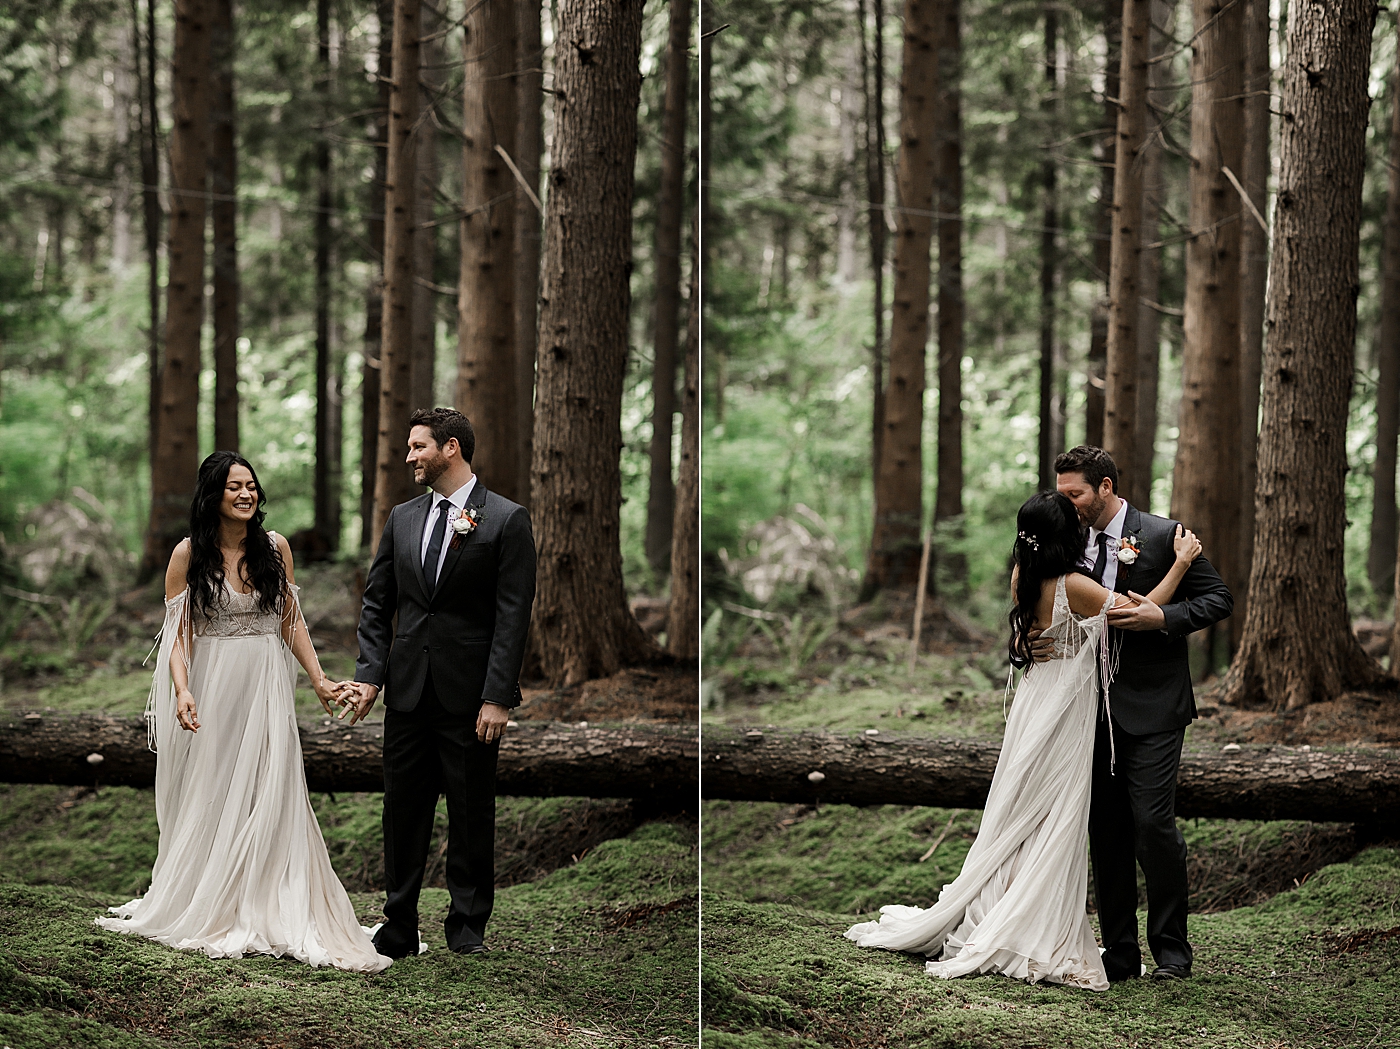 First look at The Emerald Forest | Megan Montalvo Photography